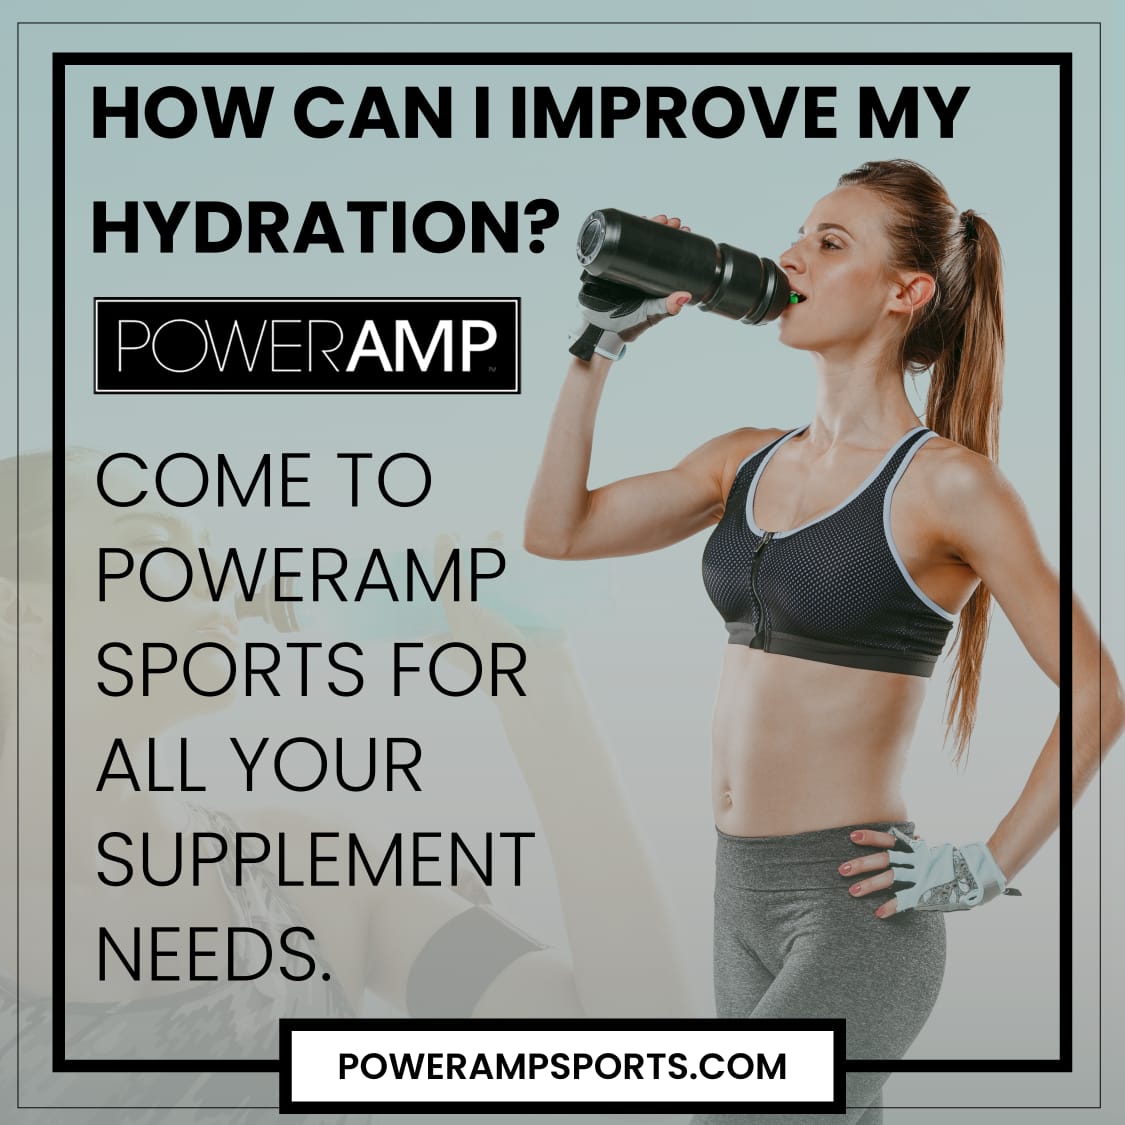 How can I improve my hydration?